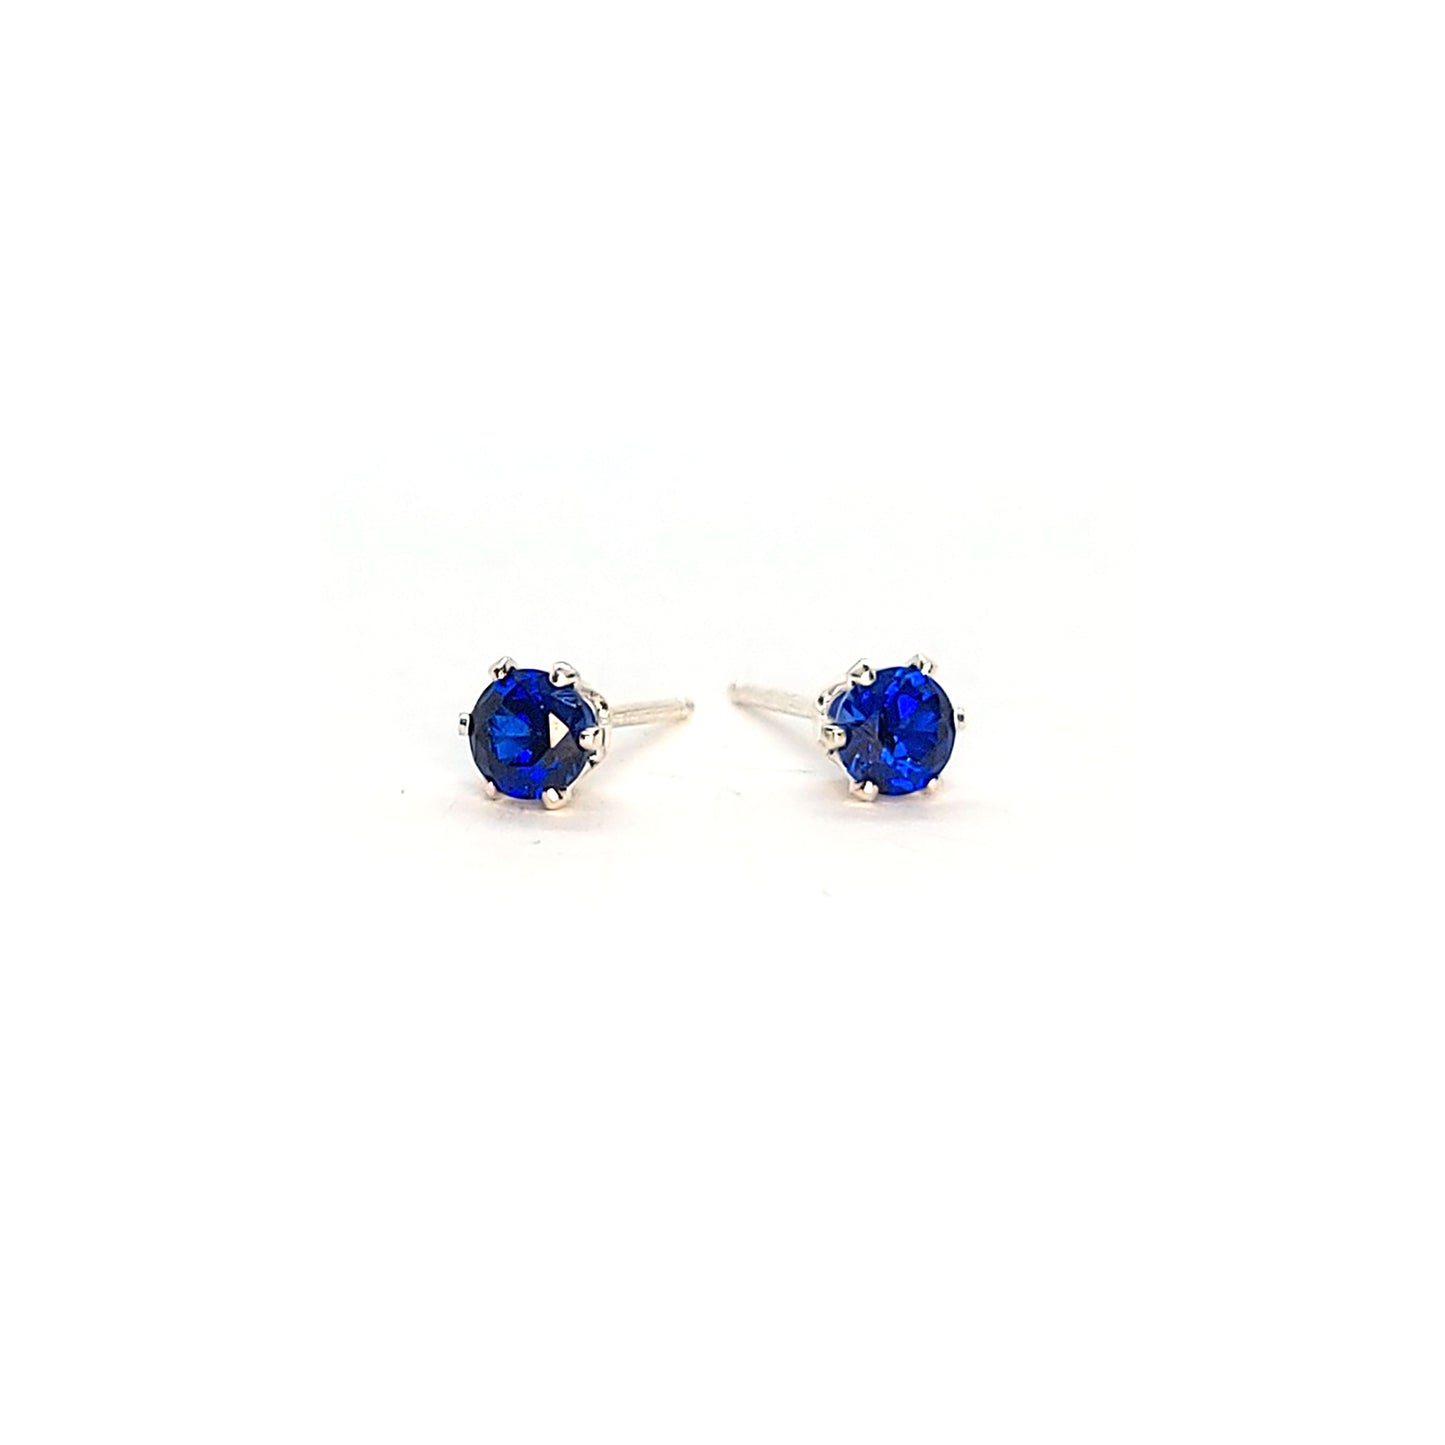 Silver 6 claw stud earrings set with dark blue sapphires. 4mm